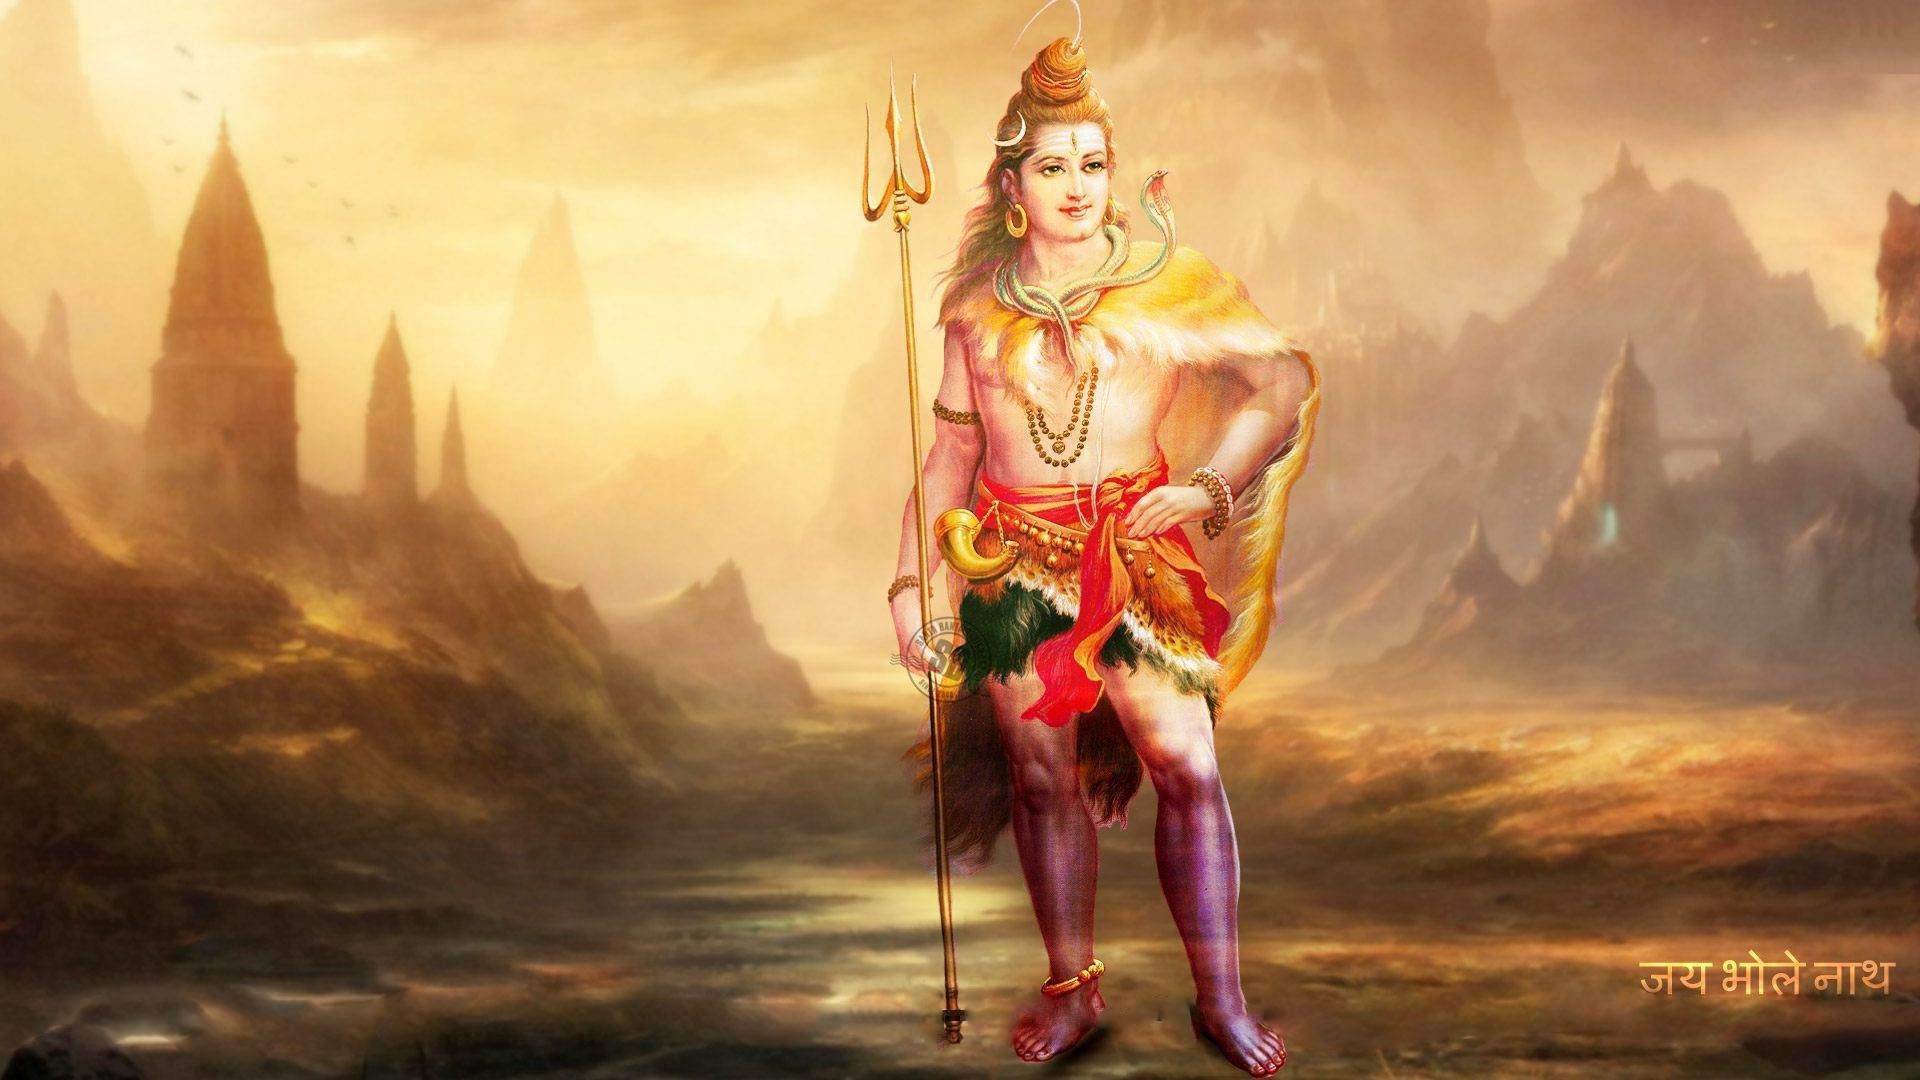 Lord Shiva Hd Wallpapers 1080p - God HD Wallpapers